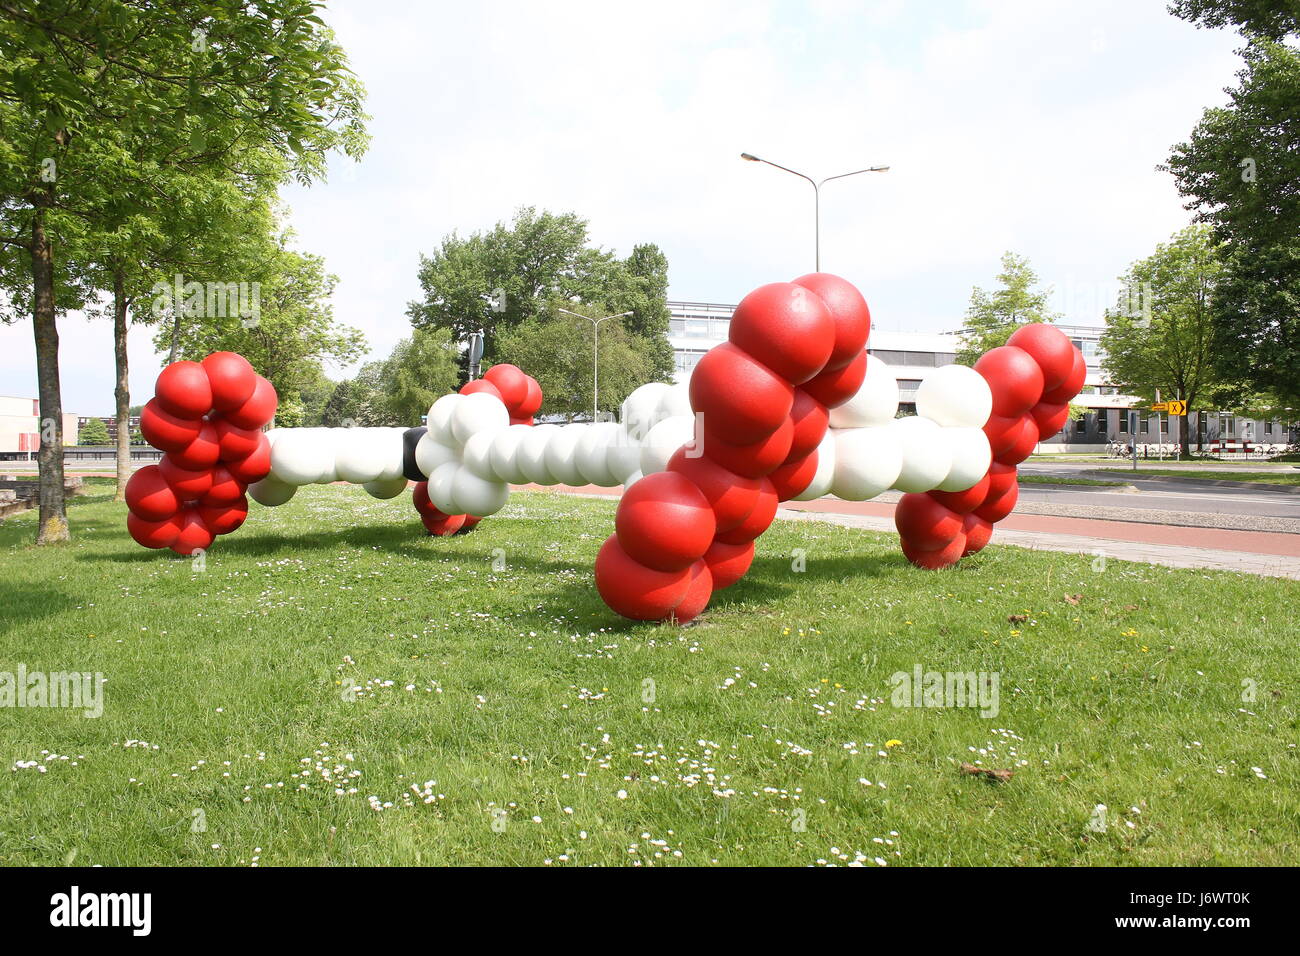 Model of an electrically driven nanocar by Groningen University chemist Ben Feringa, Chemistry Nobel Prize winner in 2016. Located at Zernike campus. Stock Photo